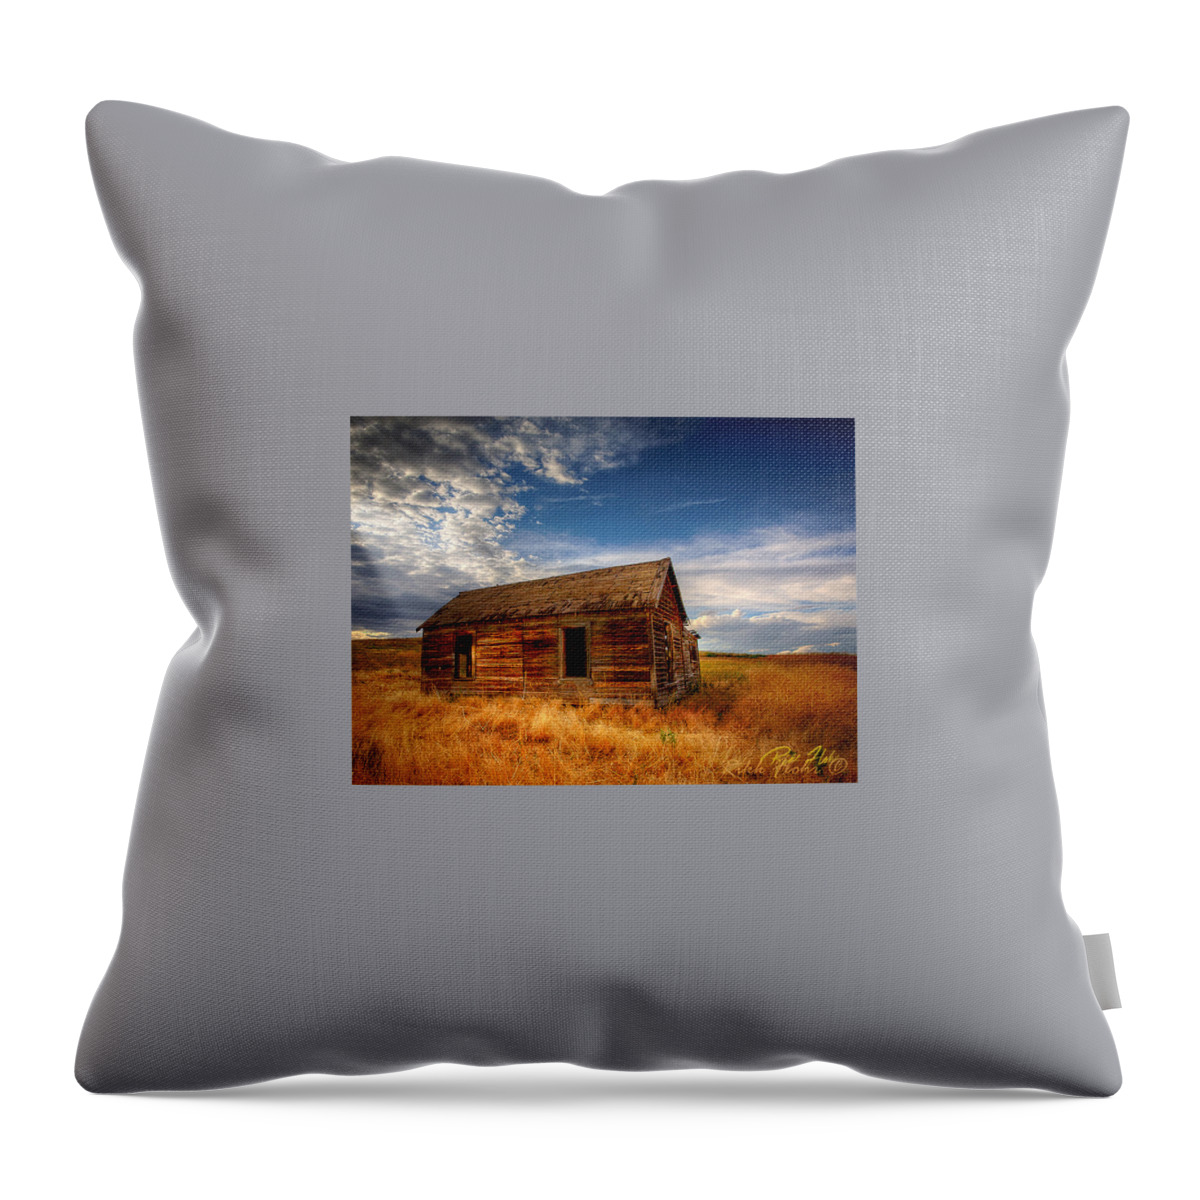 Wyoming Throw Pillow featuring the photograph Deserted near Spotted horse by Rikk Flohr